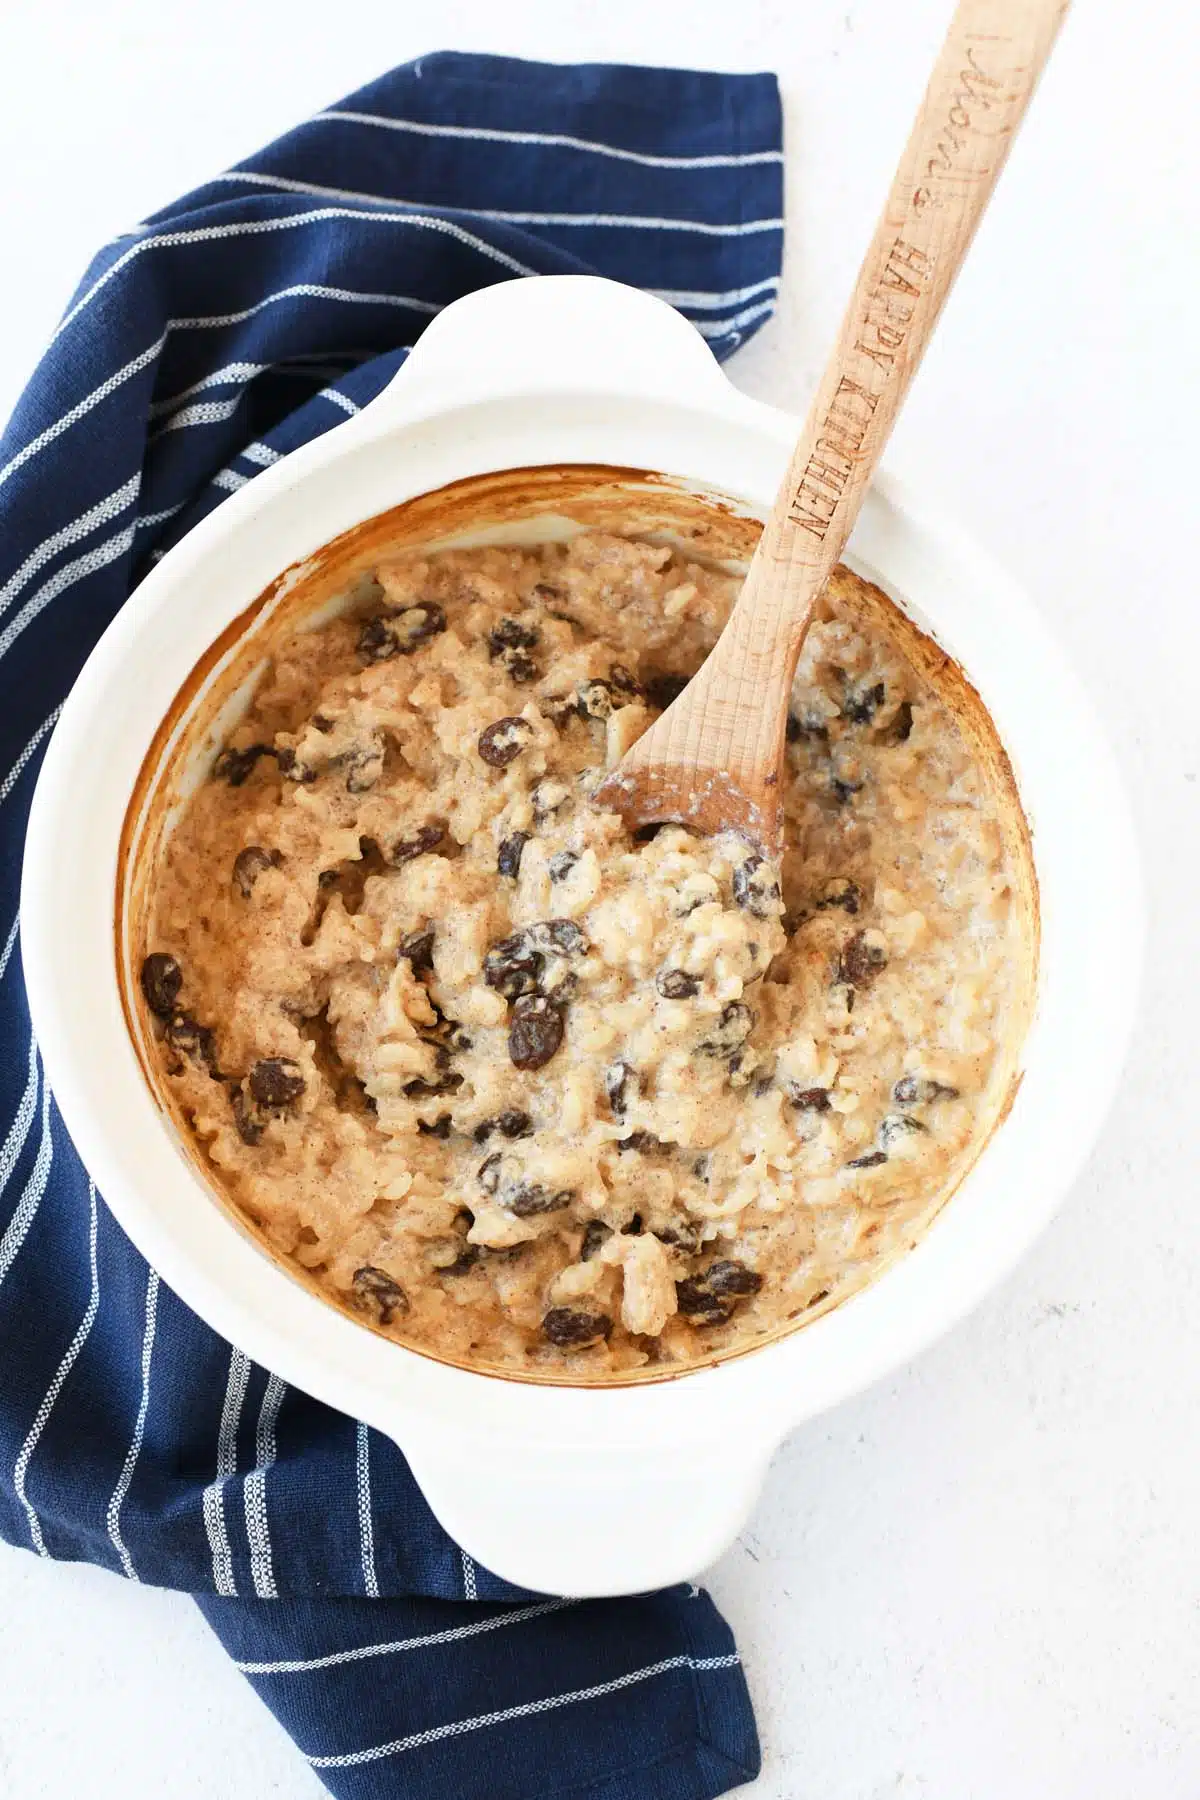 Baked rice pudding with raisins and a wooden spoon.